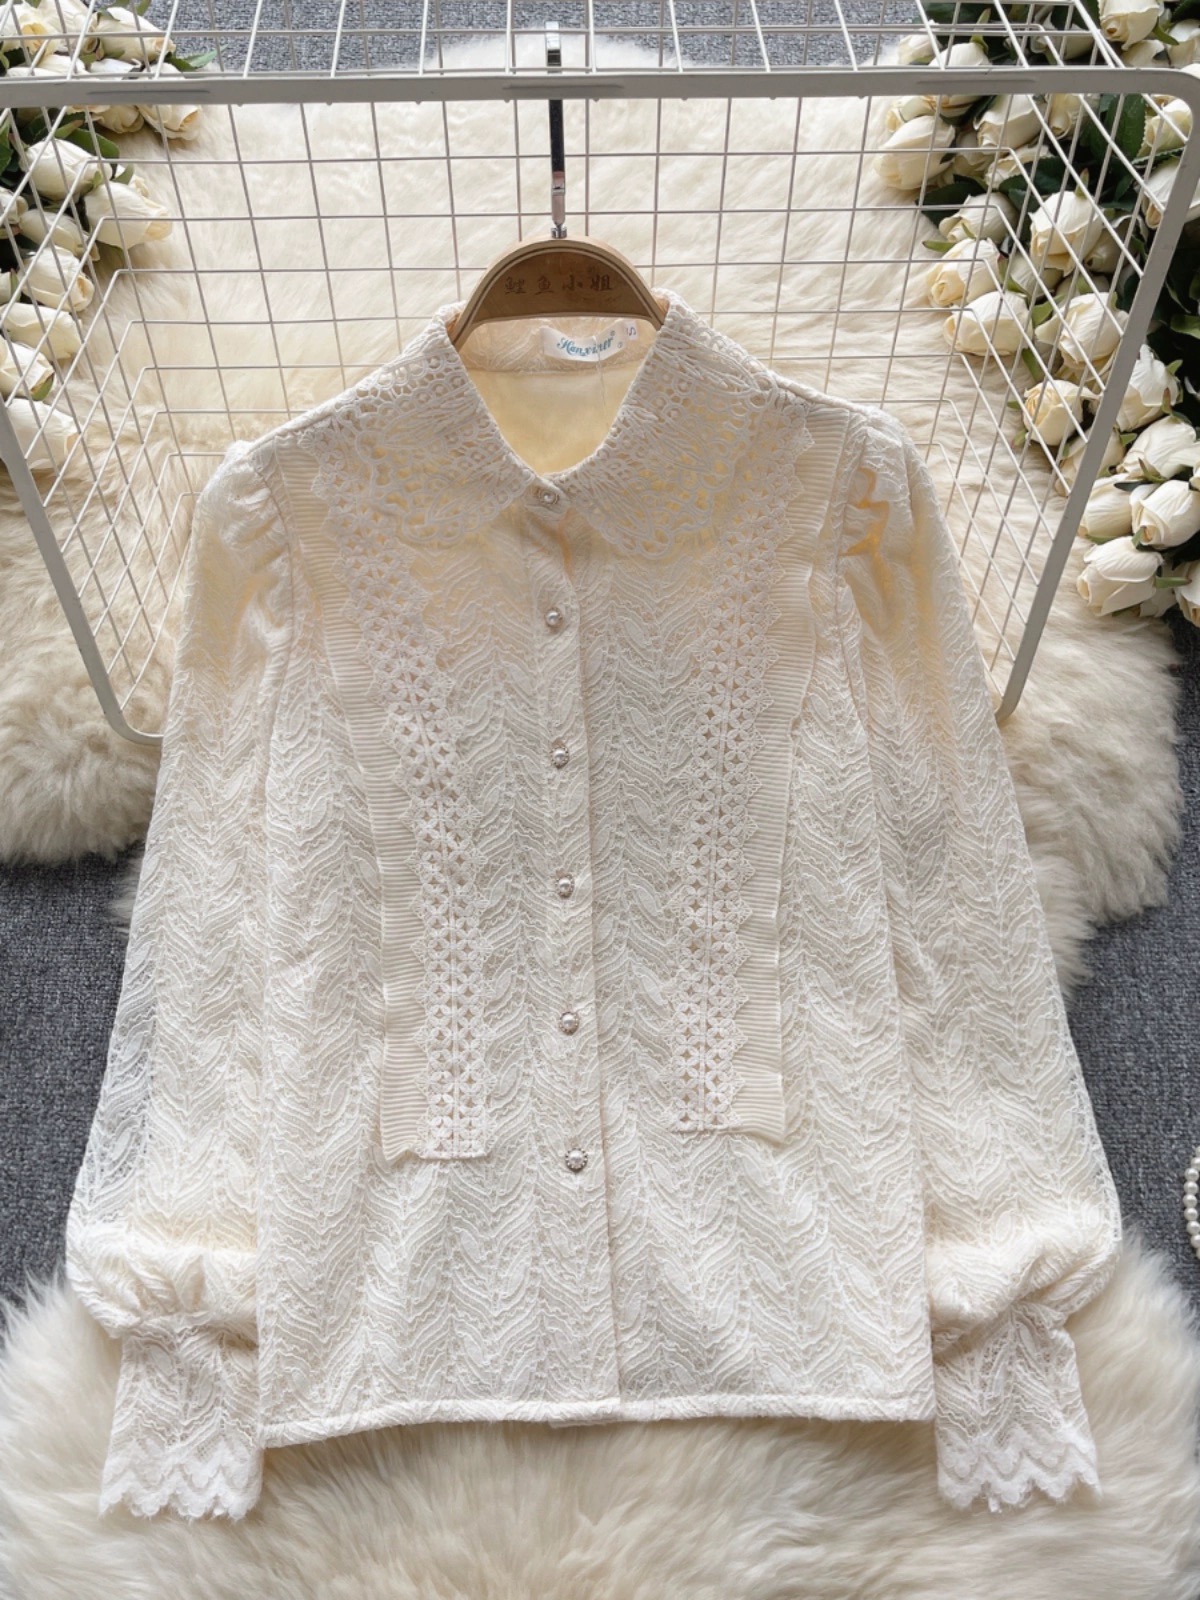 Lace Bottoming Shirt, Retro, Temperament,loose, Fashionable And Versatile Long-sleeved Shirt